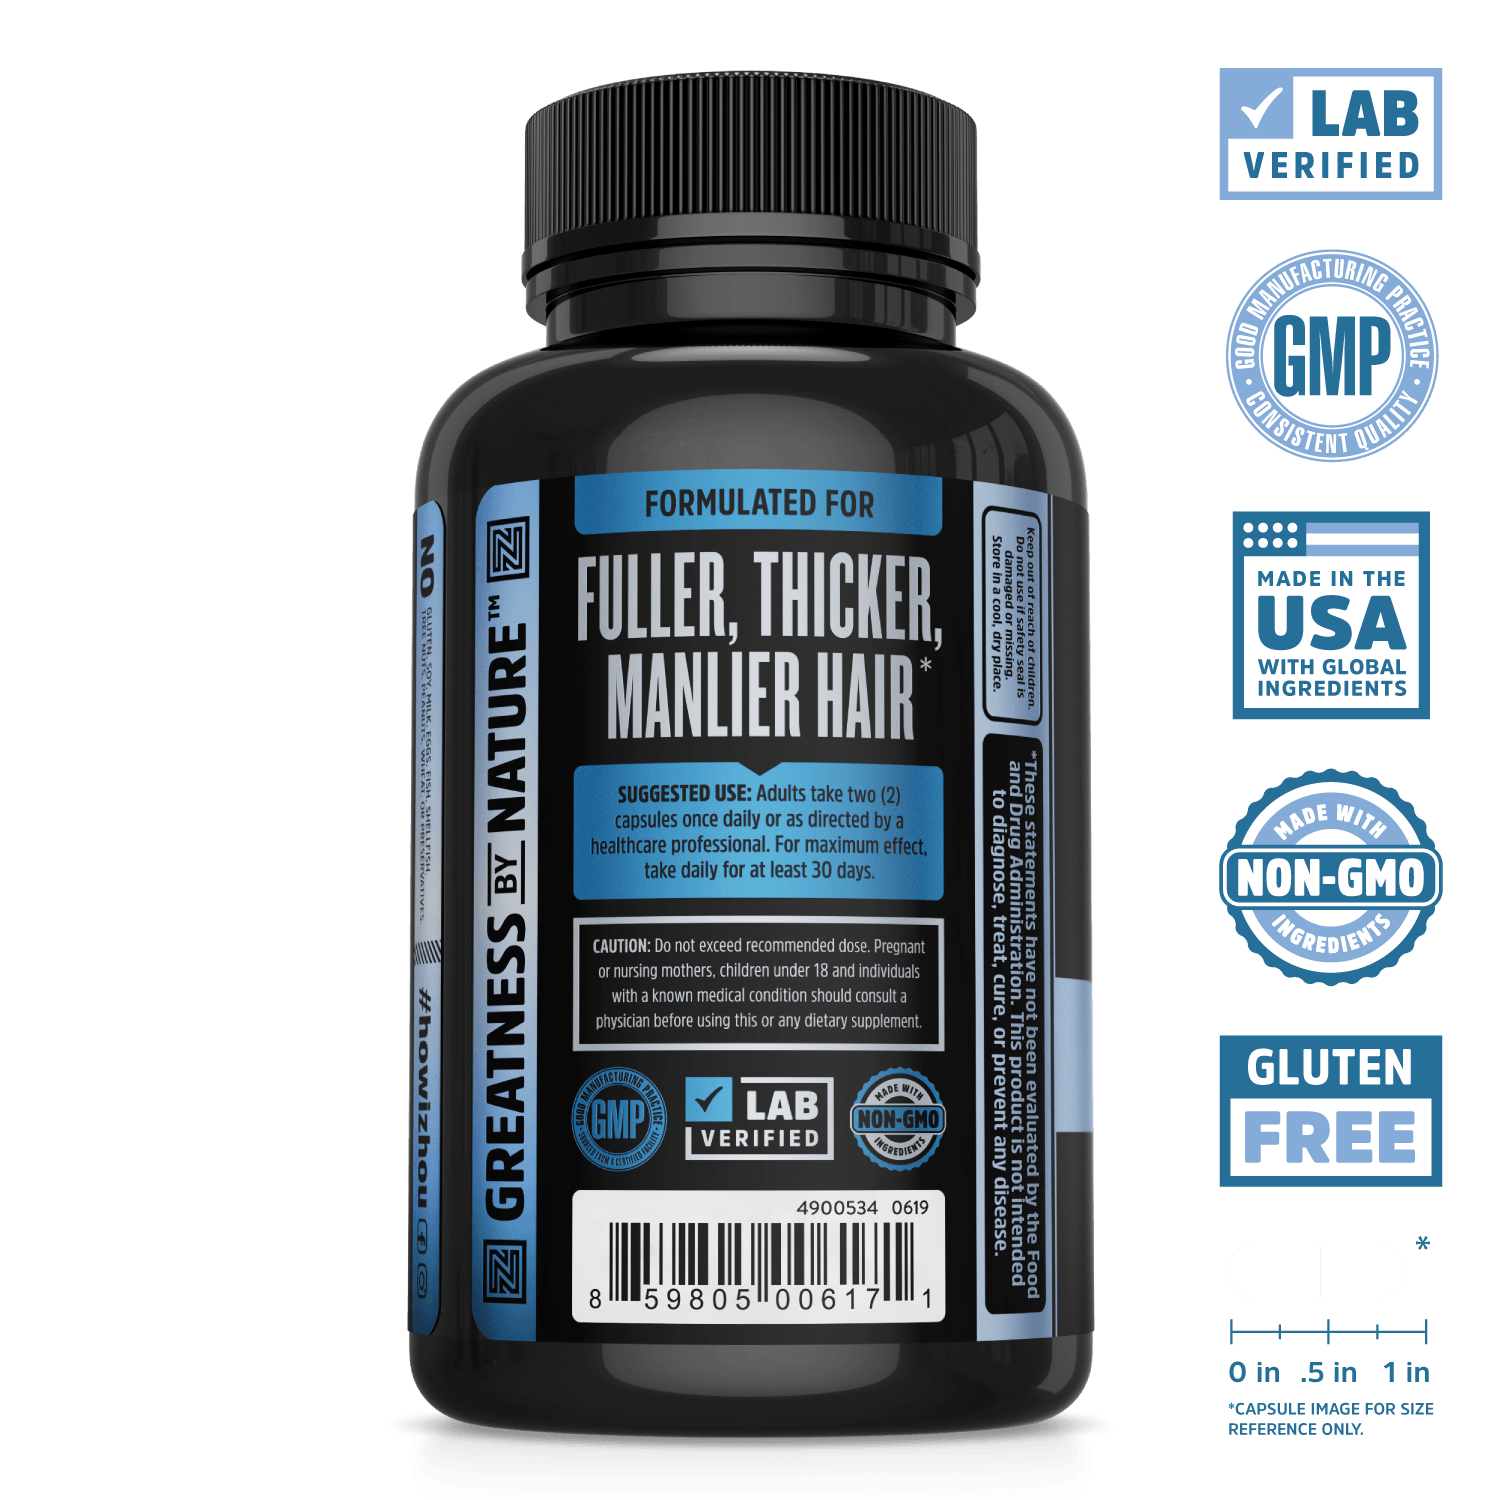 Zhou Nutrition Iron Beard Hair Growth Formula. Lab verified, good manufacturing practice, made in the USA with global ingredients, made with non-GMO ingredients, gluten free